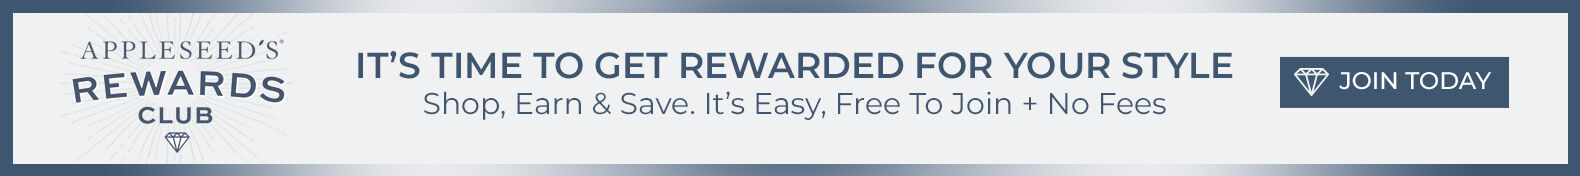 aplleseed's rewards club it's time to get rewarded for your style shop, earn & save it's easy, free to join & no fees join today